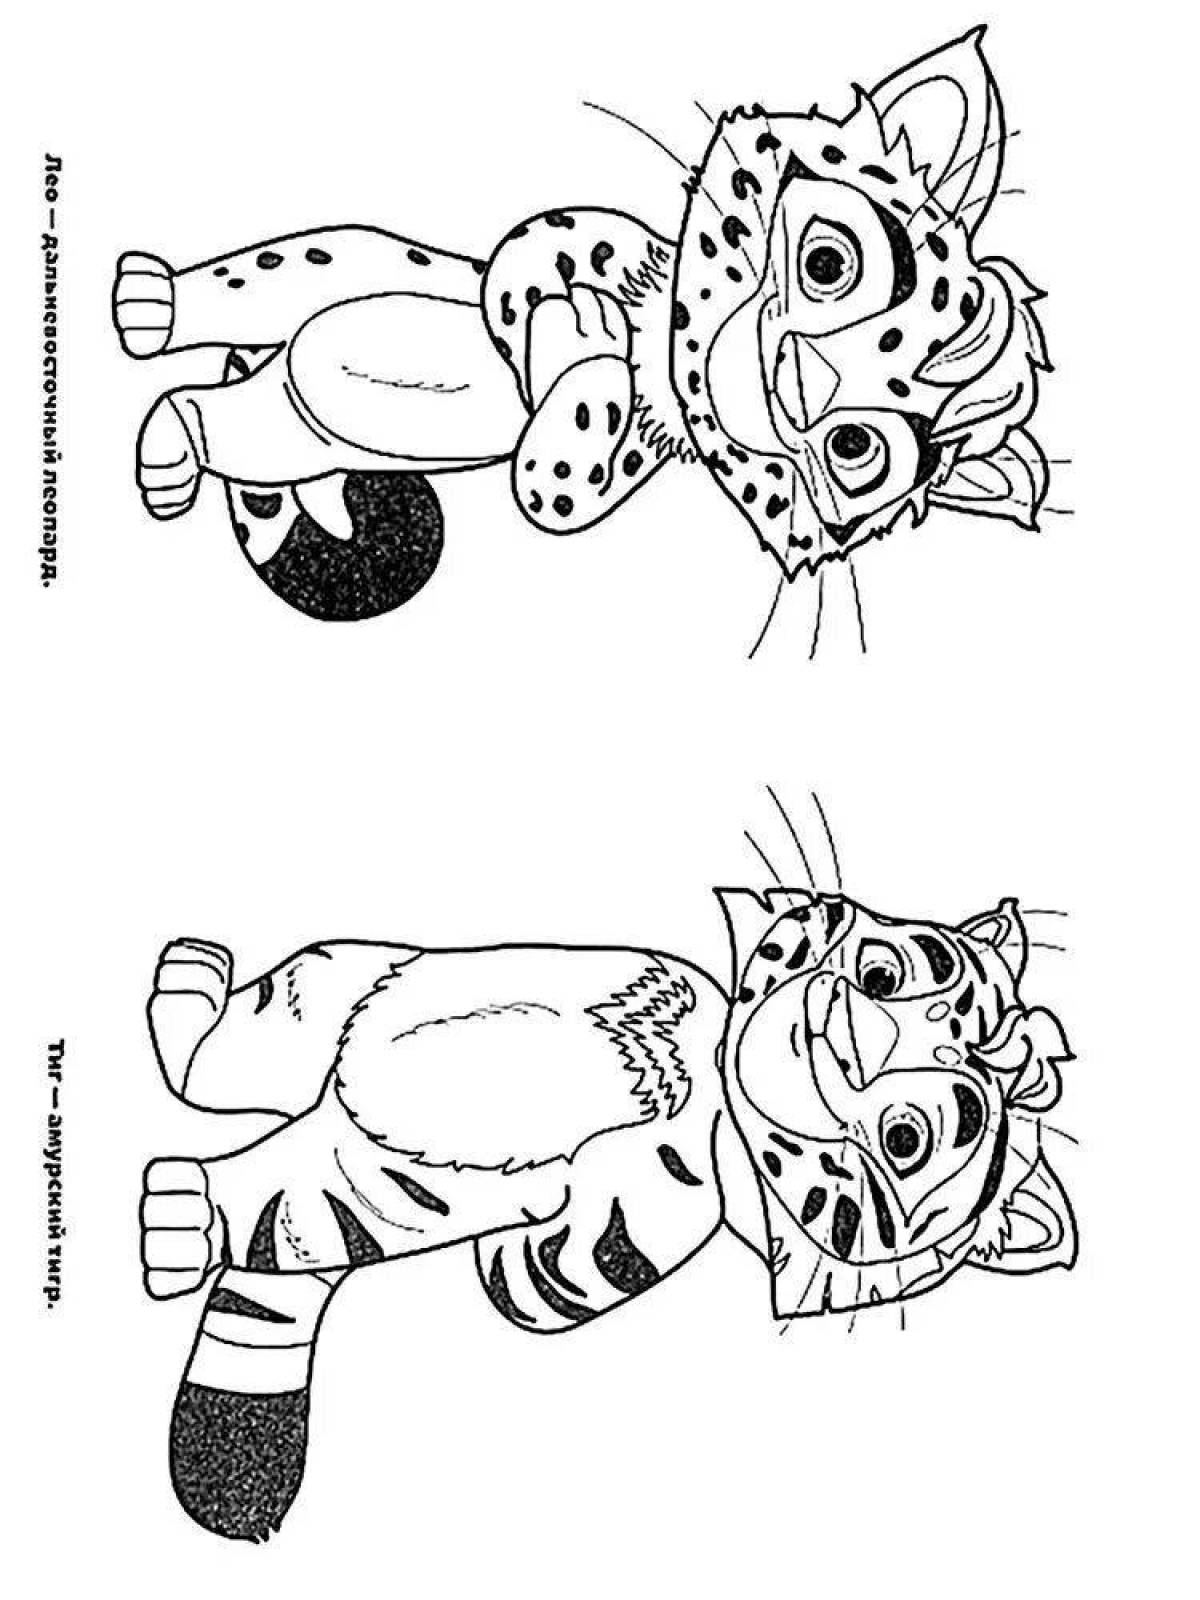 Incredible tick and leo coloring book